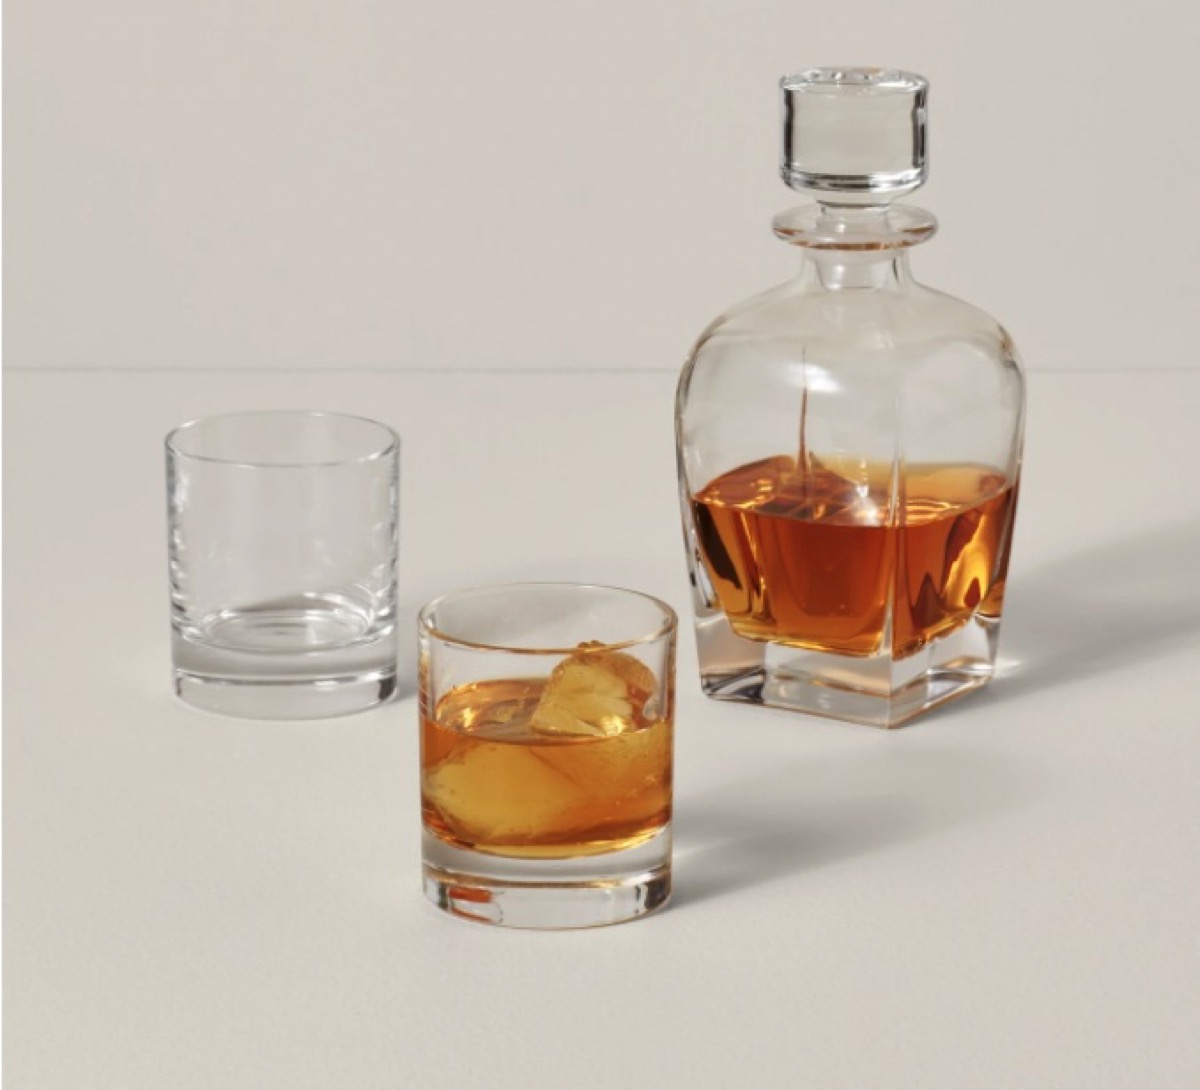 A whiskey decanter set